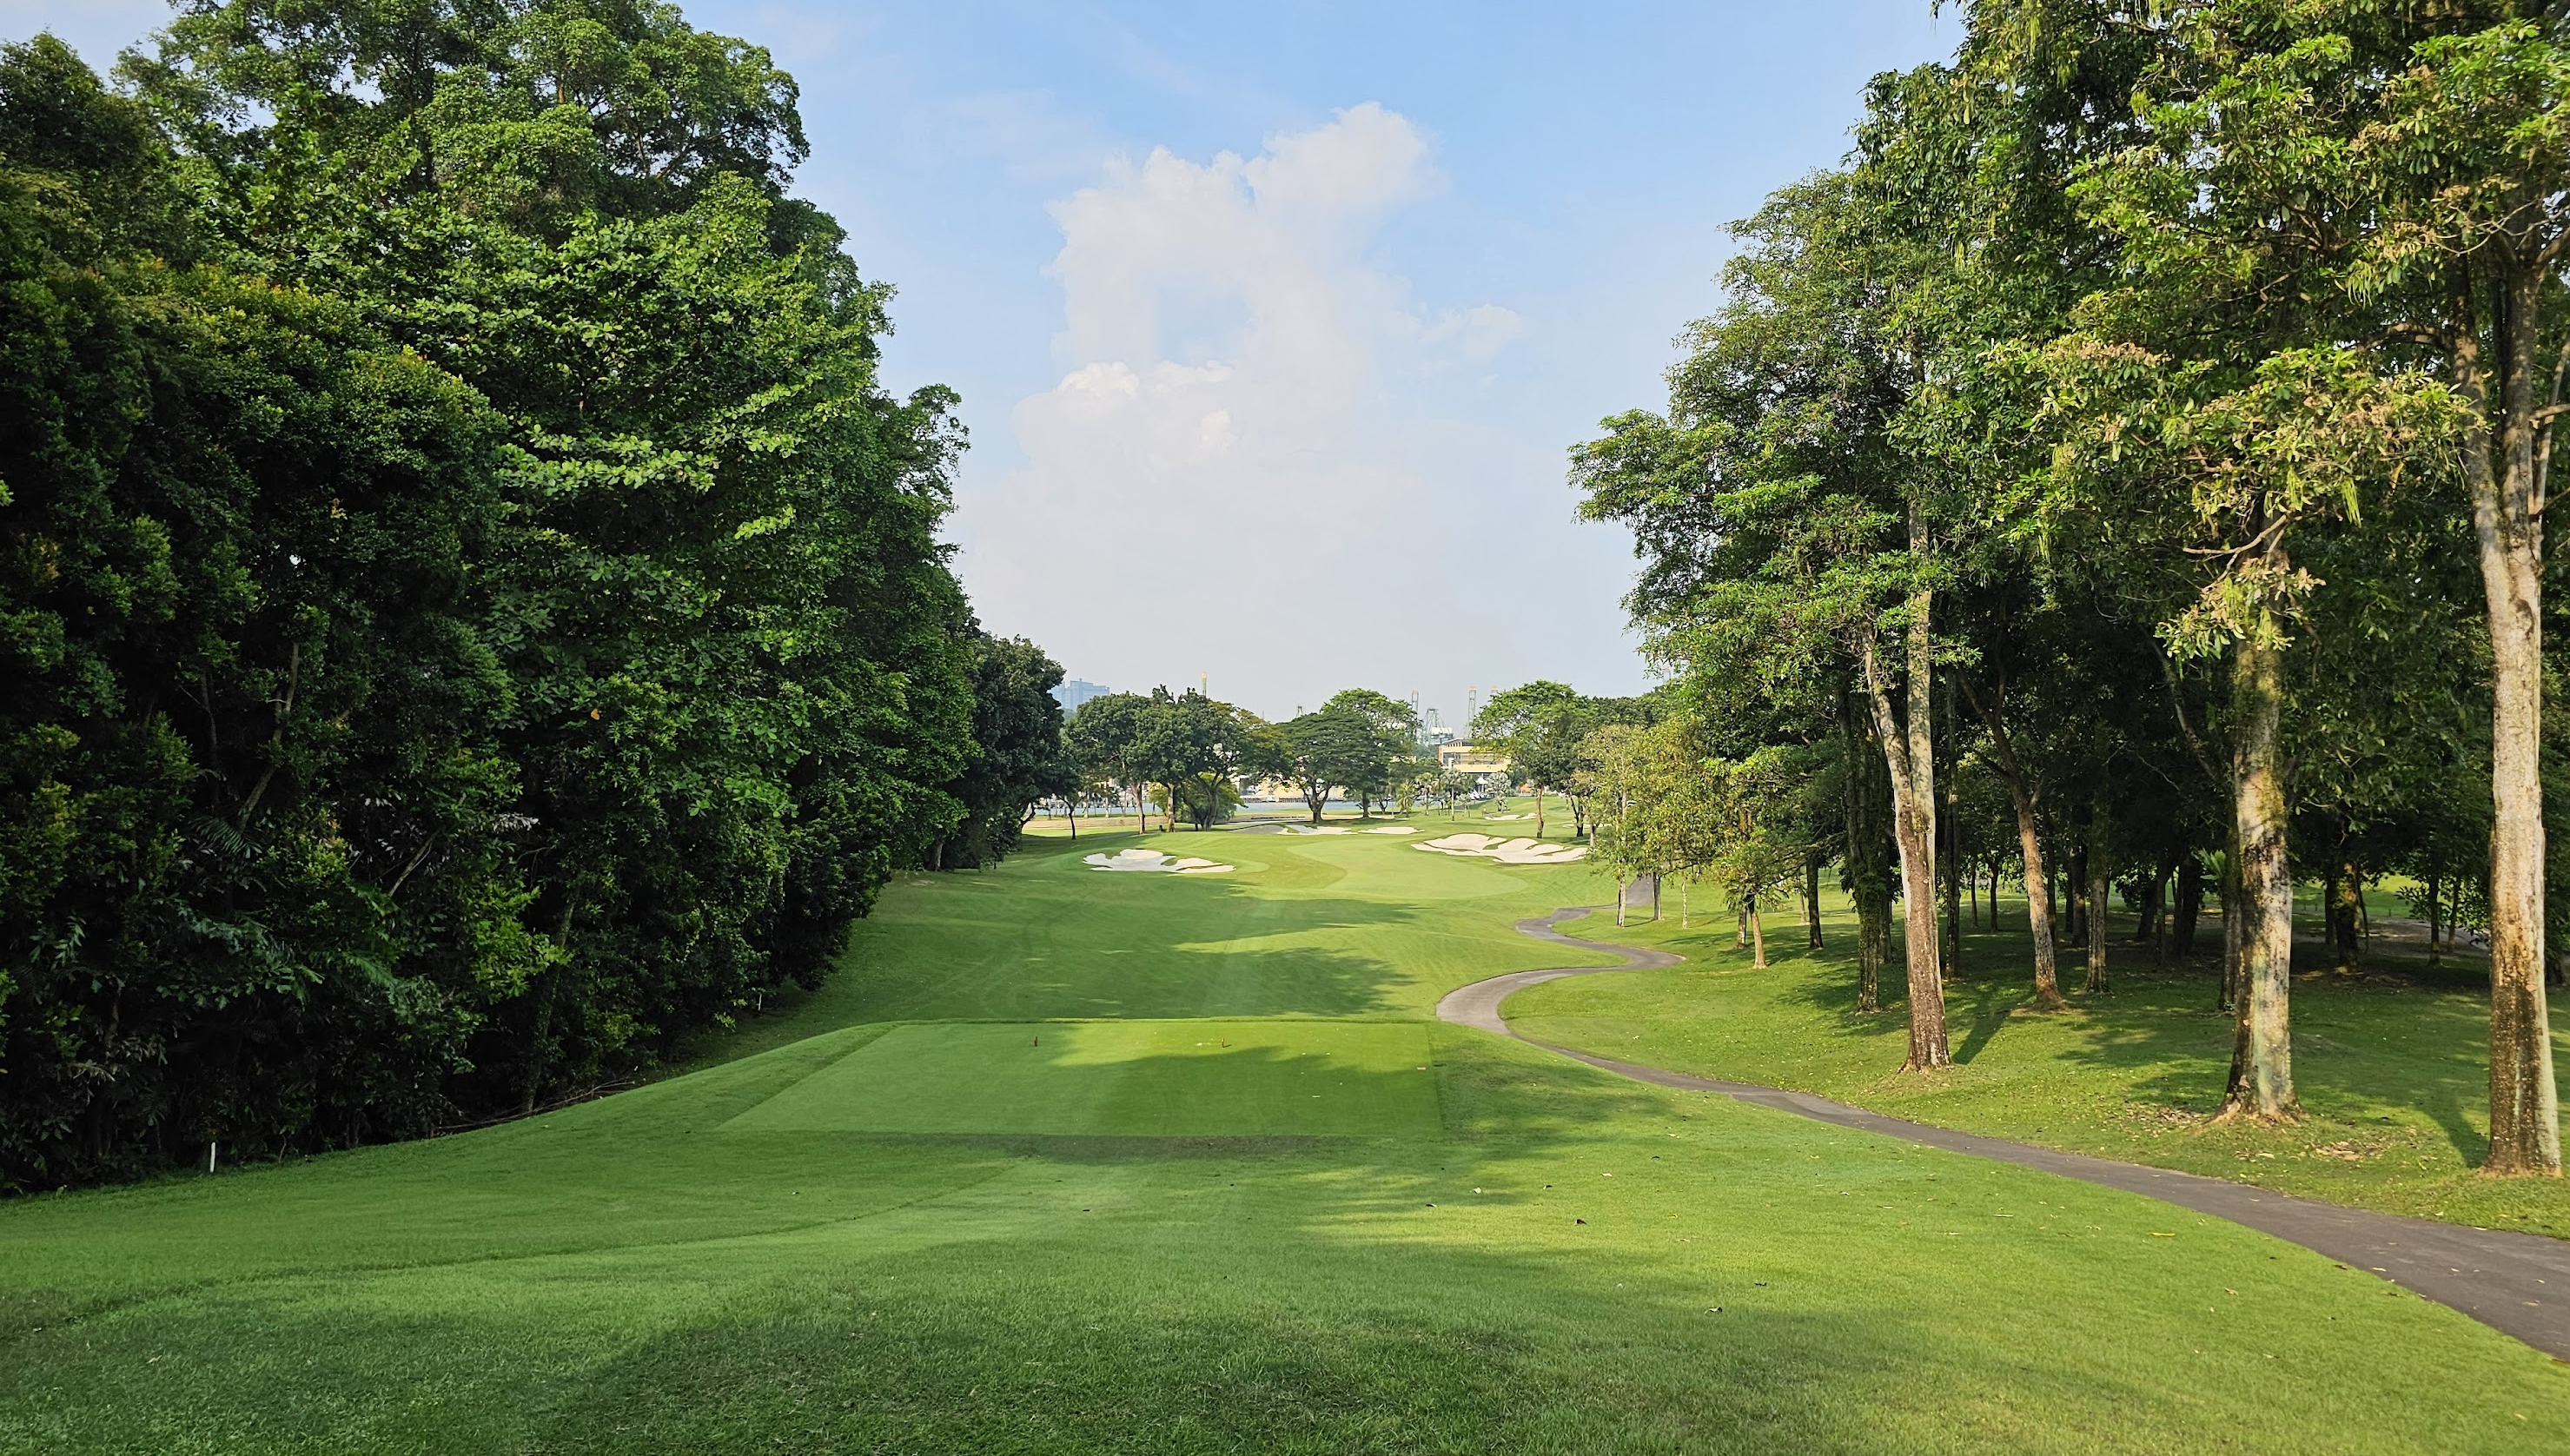 The 12th hole on the Serapong Course at Sentosa Golf Club